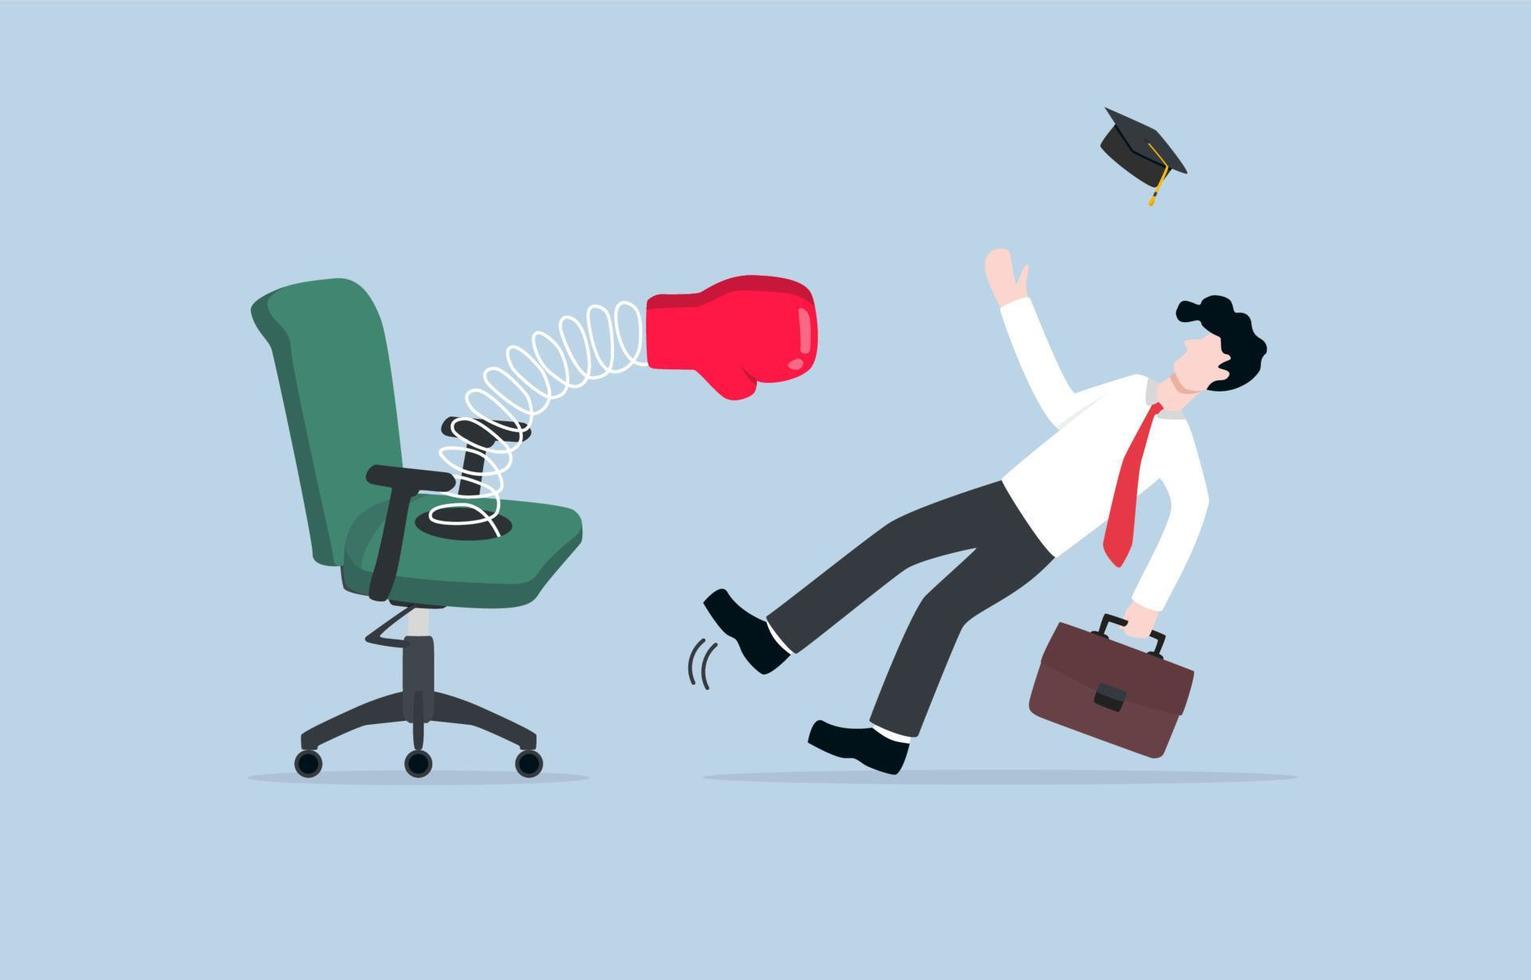 Failing to get job or having less experience than required, unemployment problem of new graduates concept. Vacant chair knocked down inexperienced candidate with big attached boxing glove. vector